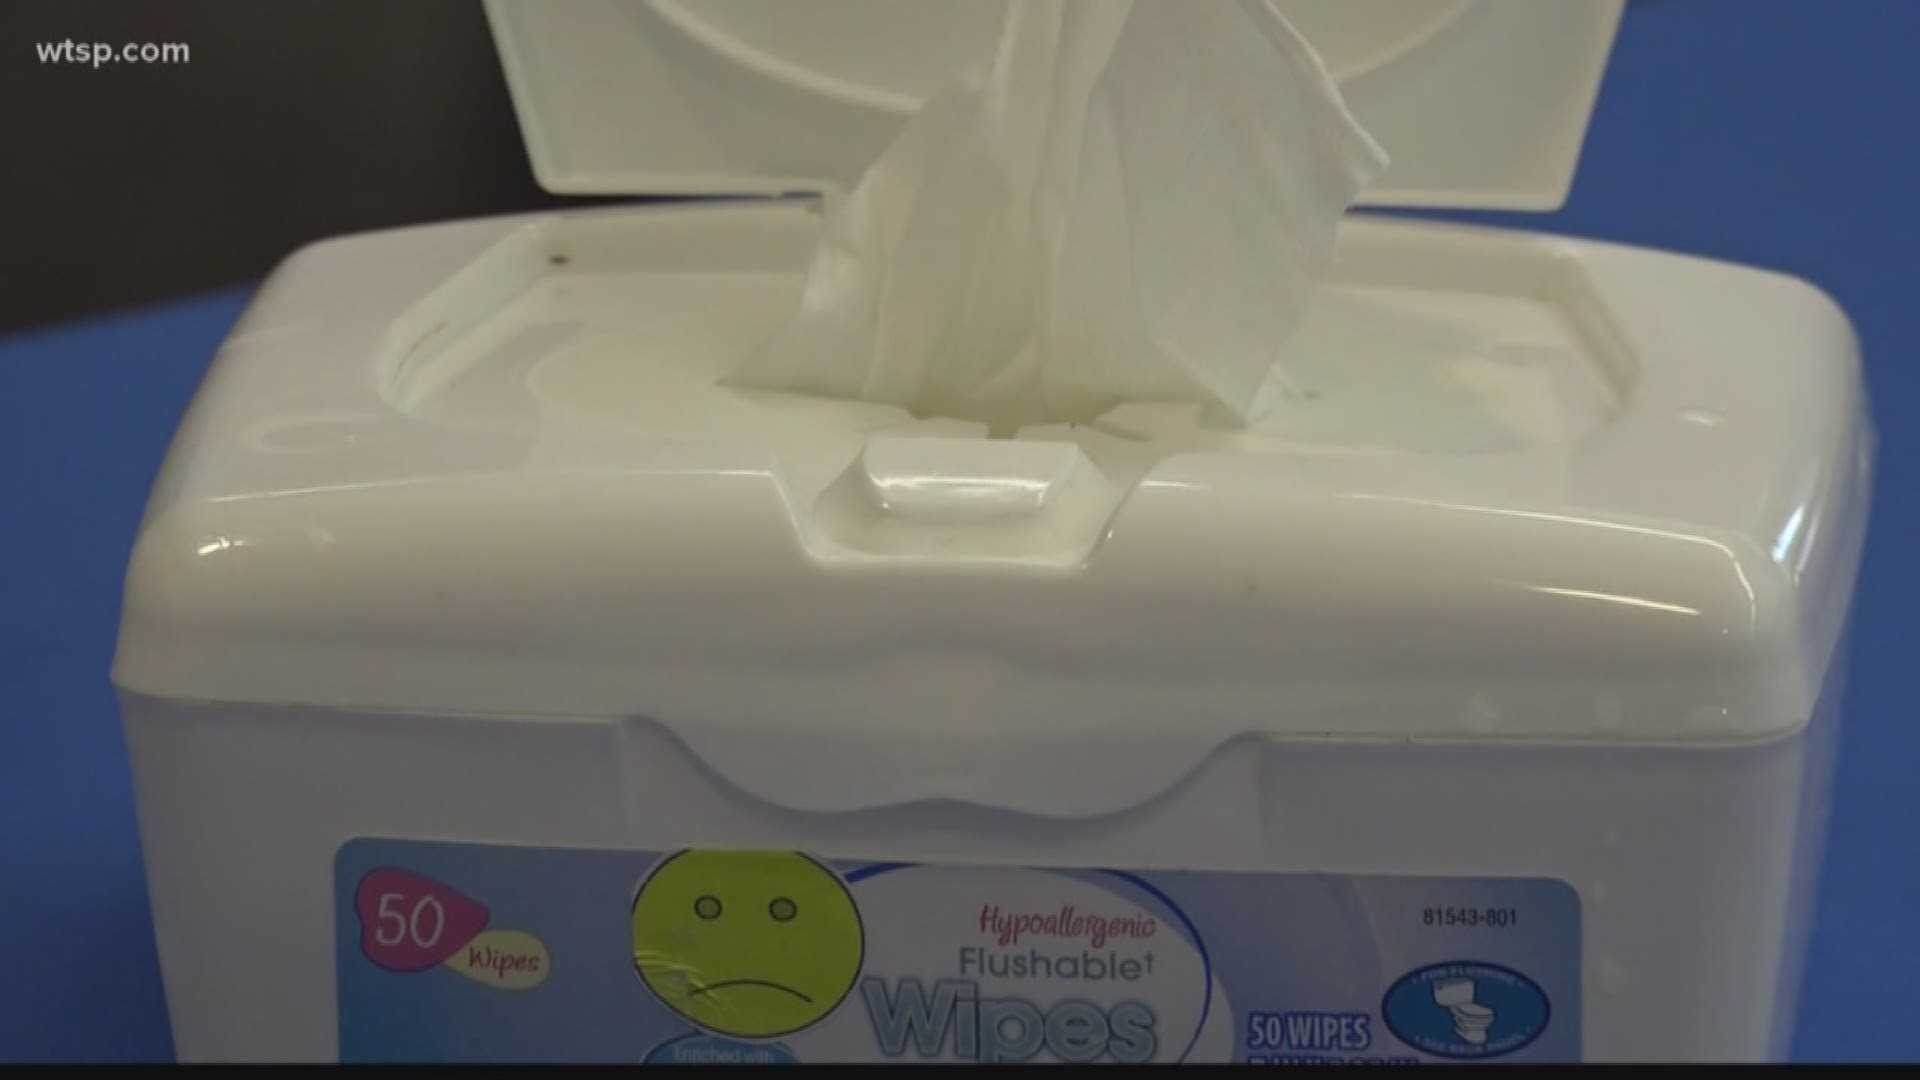 You'll want to think twice before you flush those wipes. https://on.wtsp.com/2kJMXqK